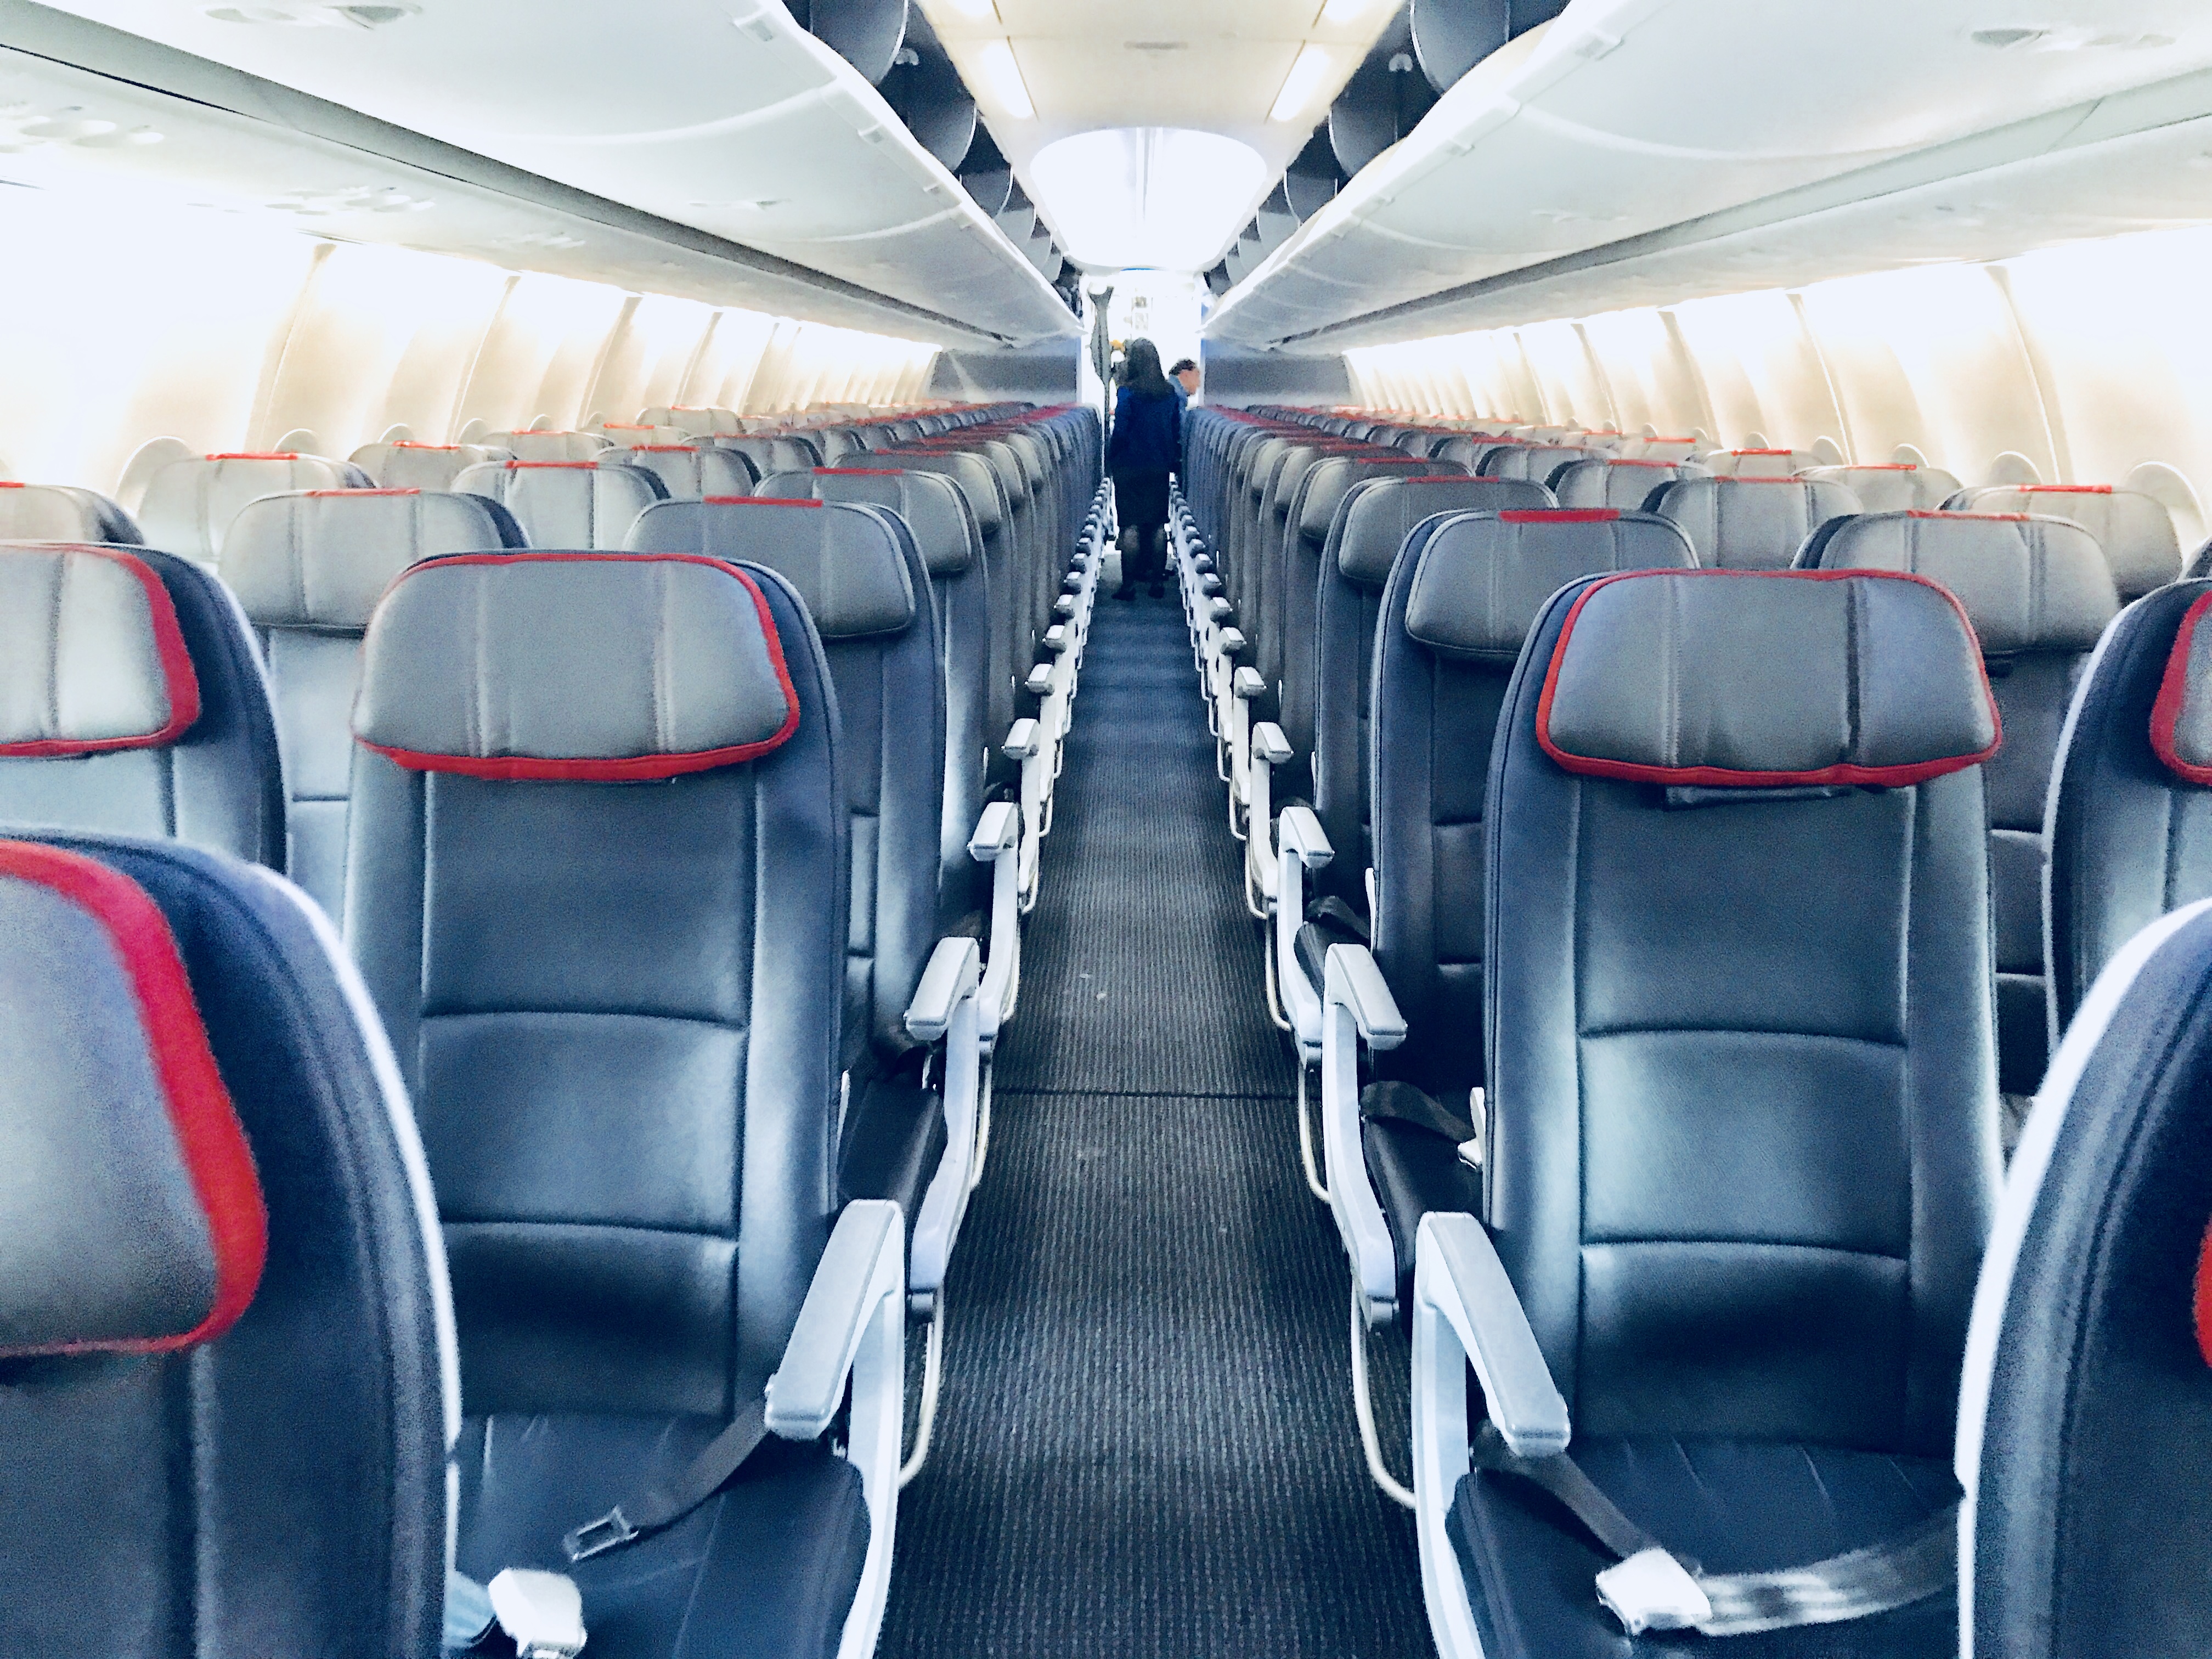 A look at Main Cabin on American's 737 MAX. Image by Chris Dong